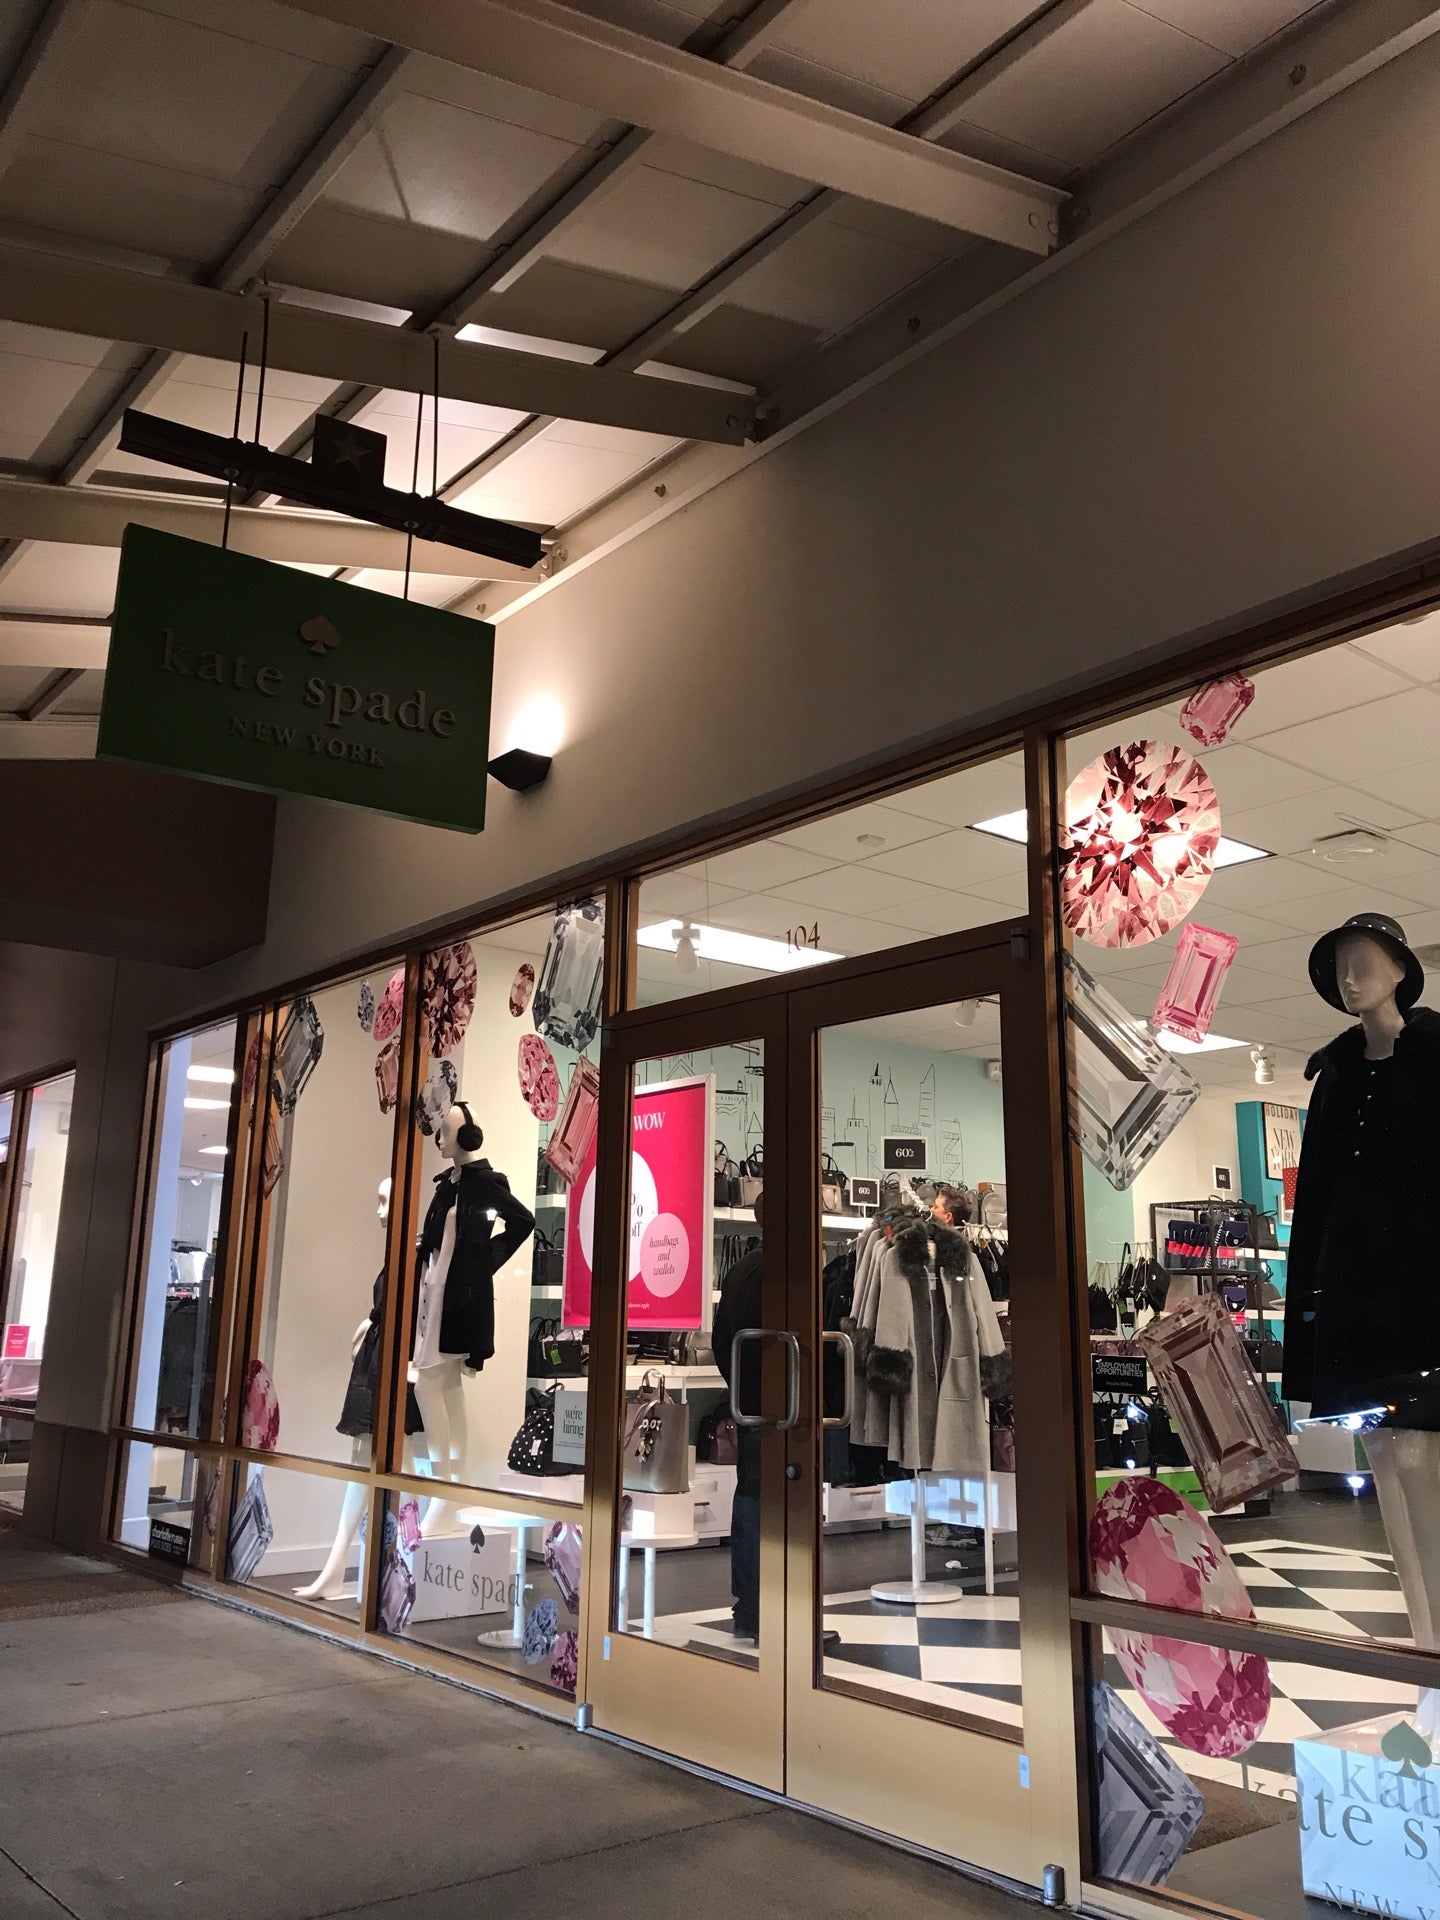 Kate Spade Outlet, 820 W. Stacy Road, Ste 104, Allen, TX,  Accessories-Fashion - MapQuest